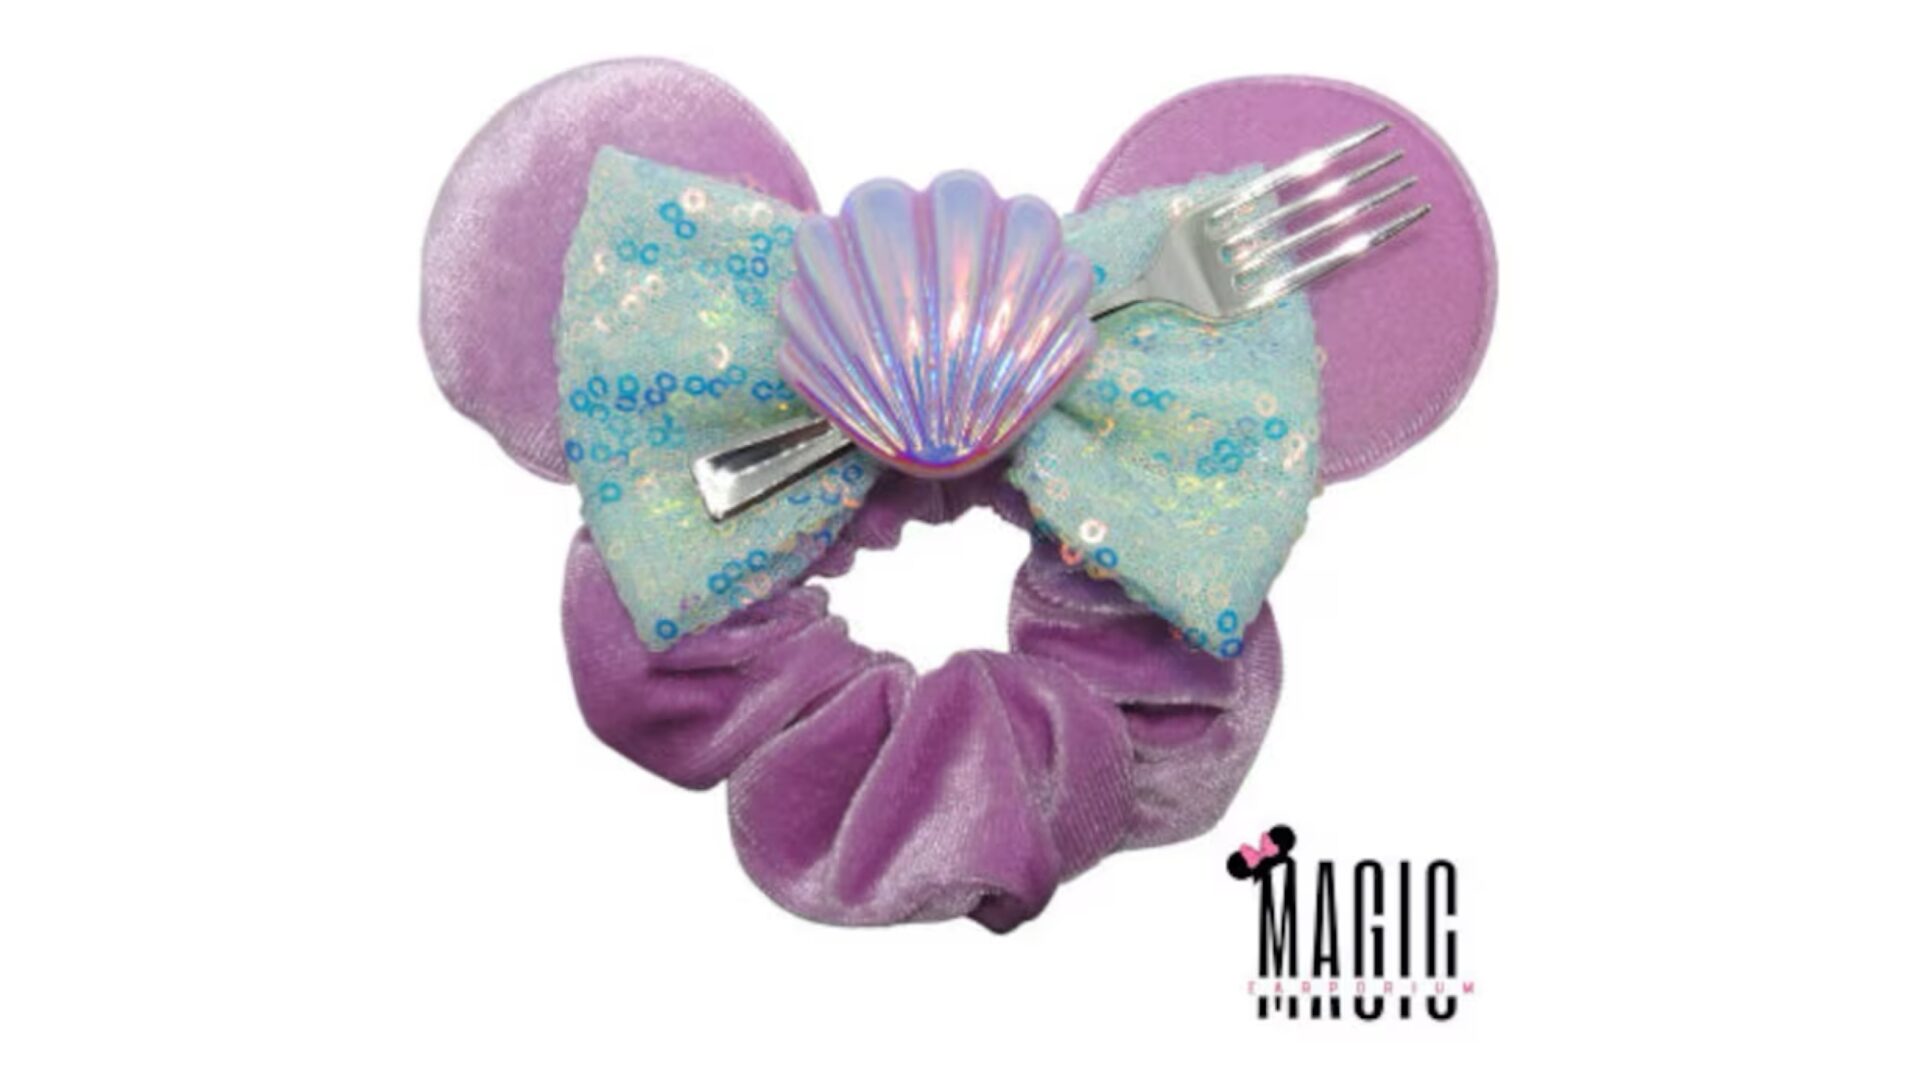 Make This Little Mermaid Scrunchie Part Of Your Hairstyle!